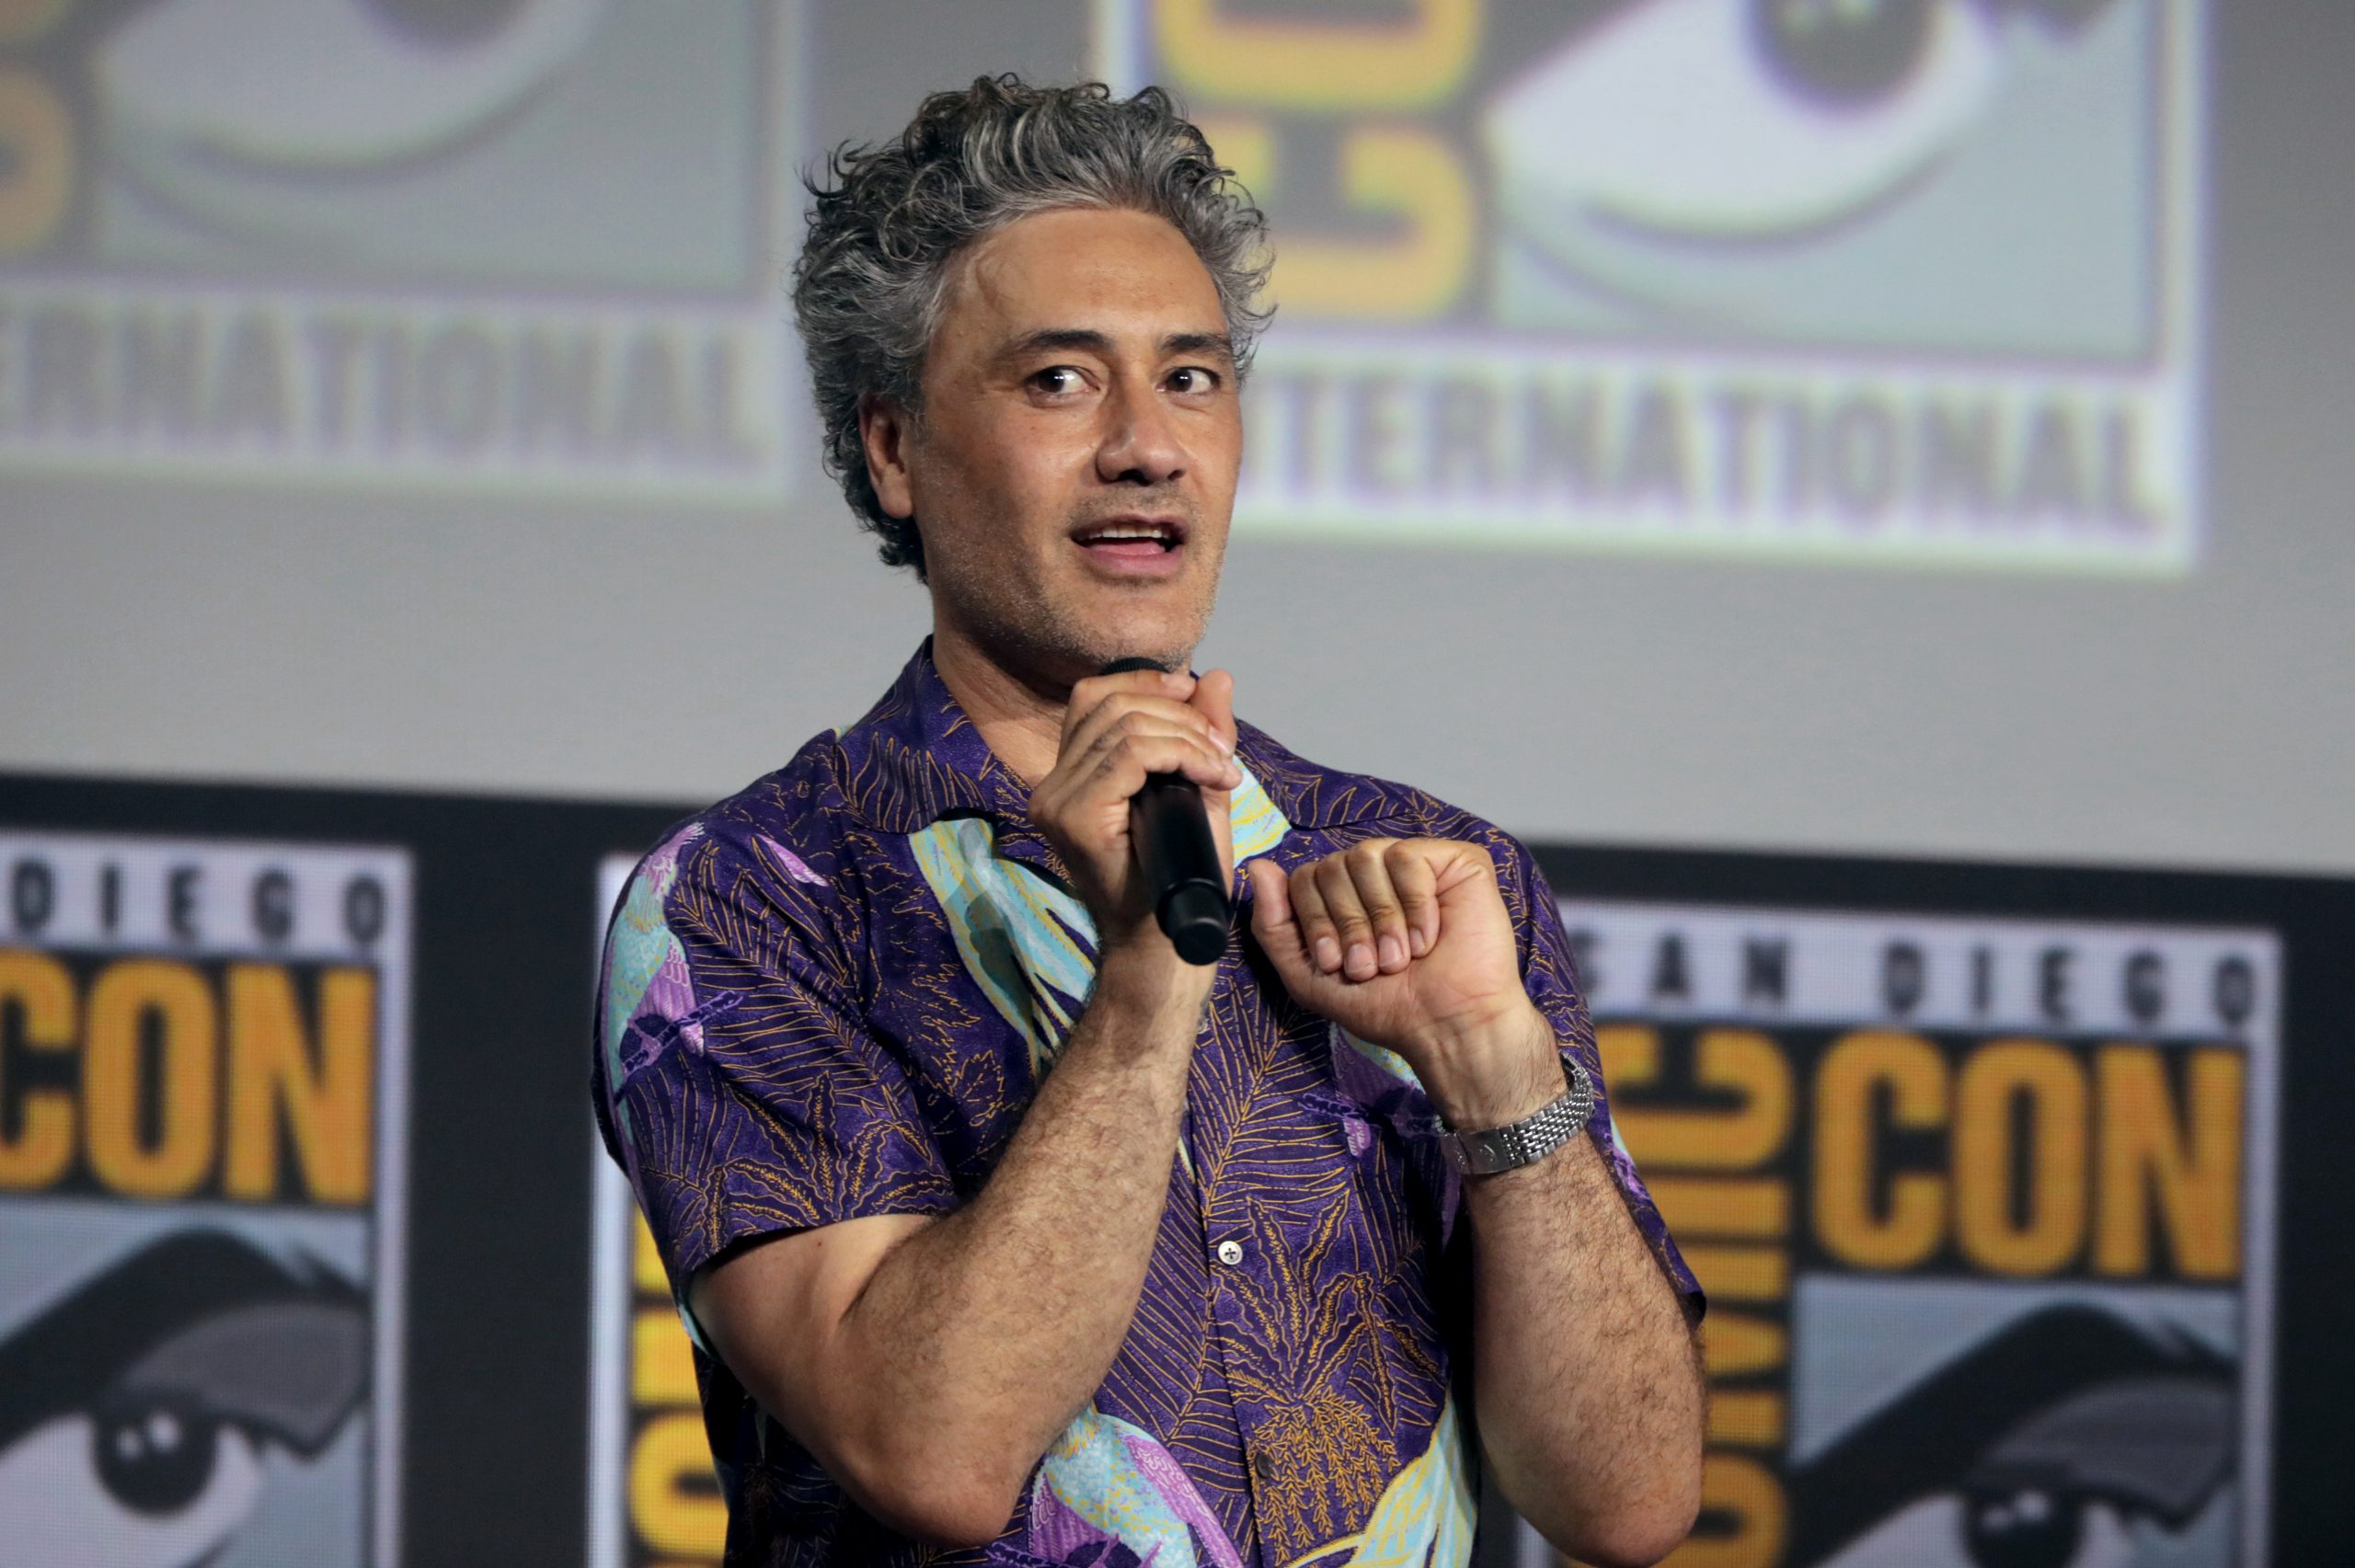 This is a surprise to me, but a new report from Deadline indicates the Taika Waititi Star Wars movie will film next year.